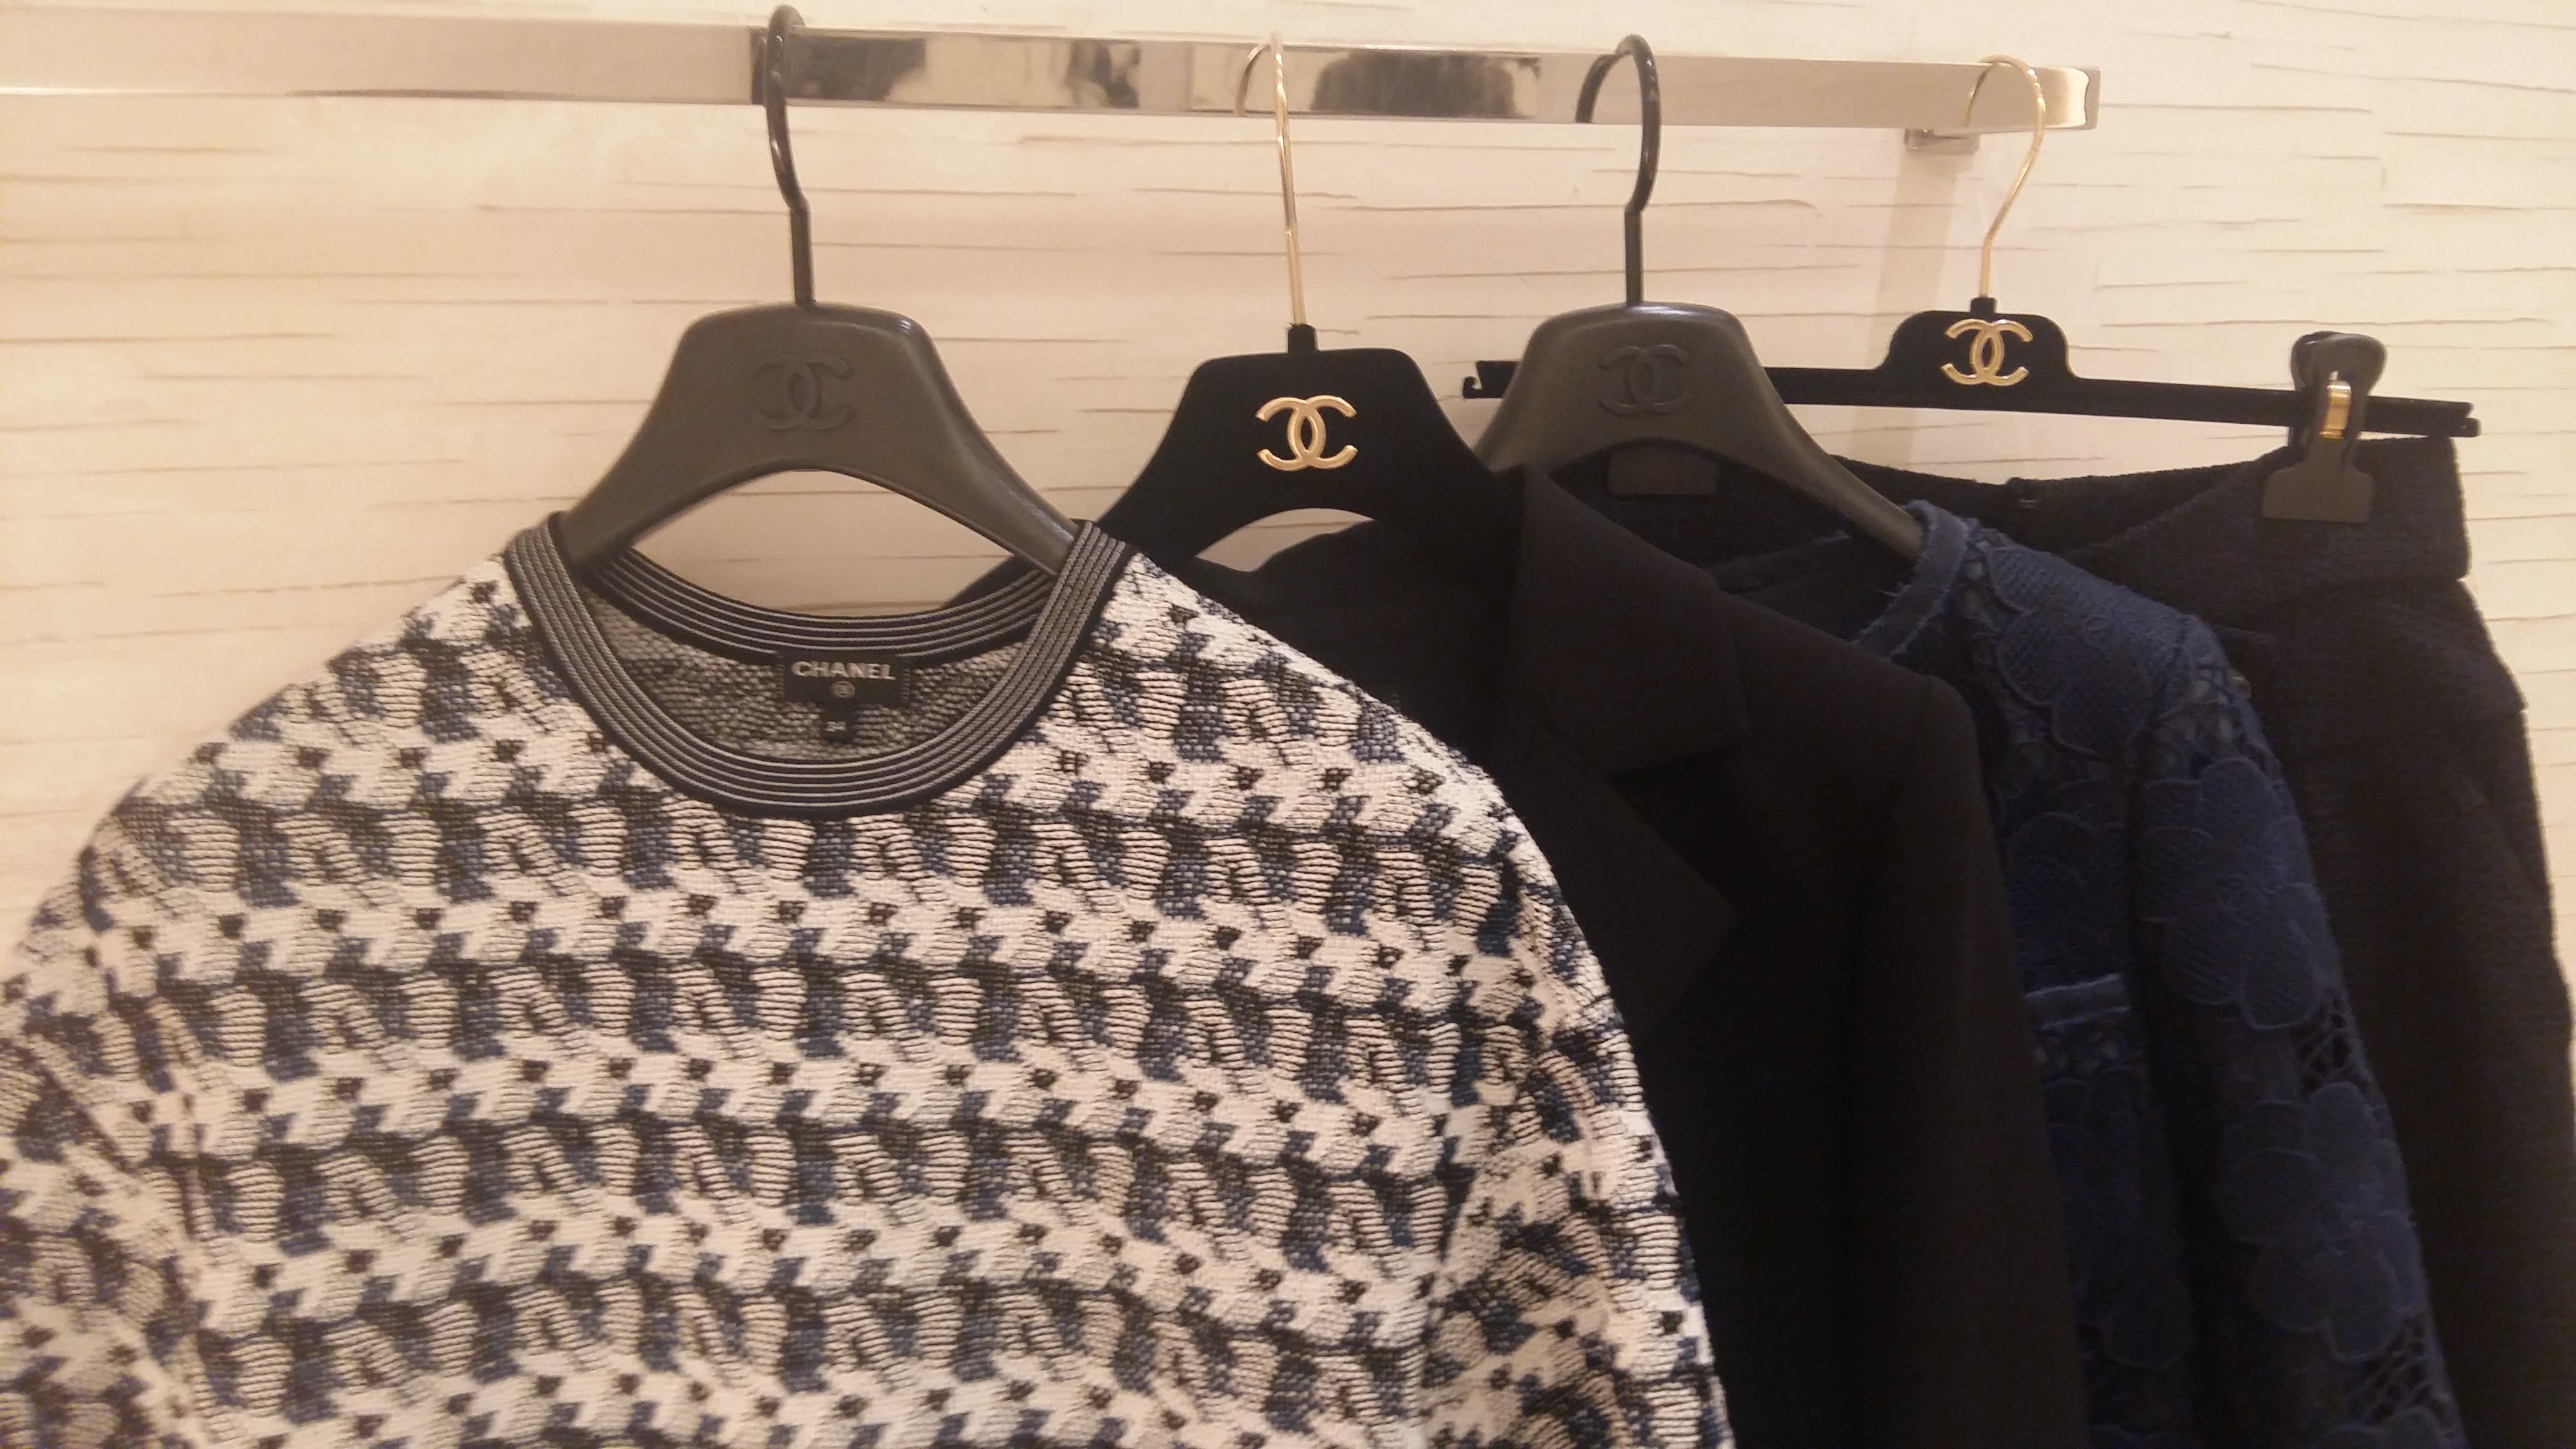 Reveals: Chanel RTW Sale Purchases (Part 1) – For Days Like These